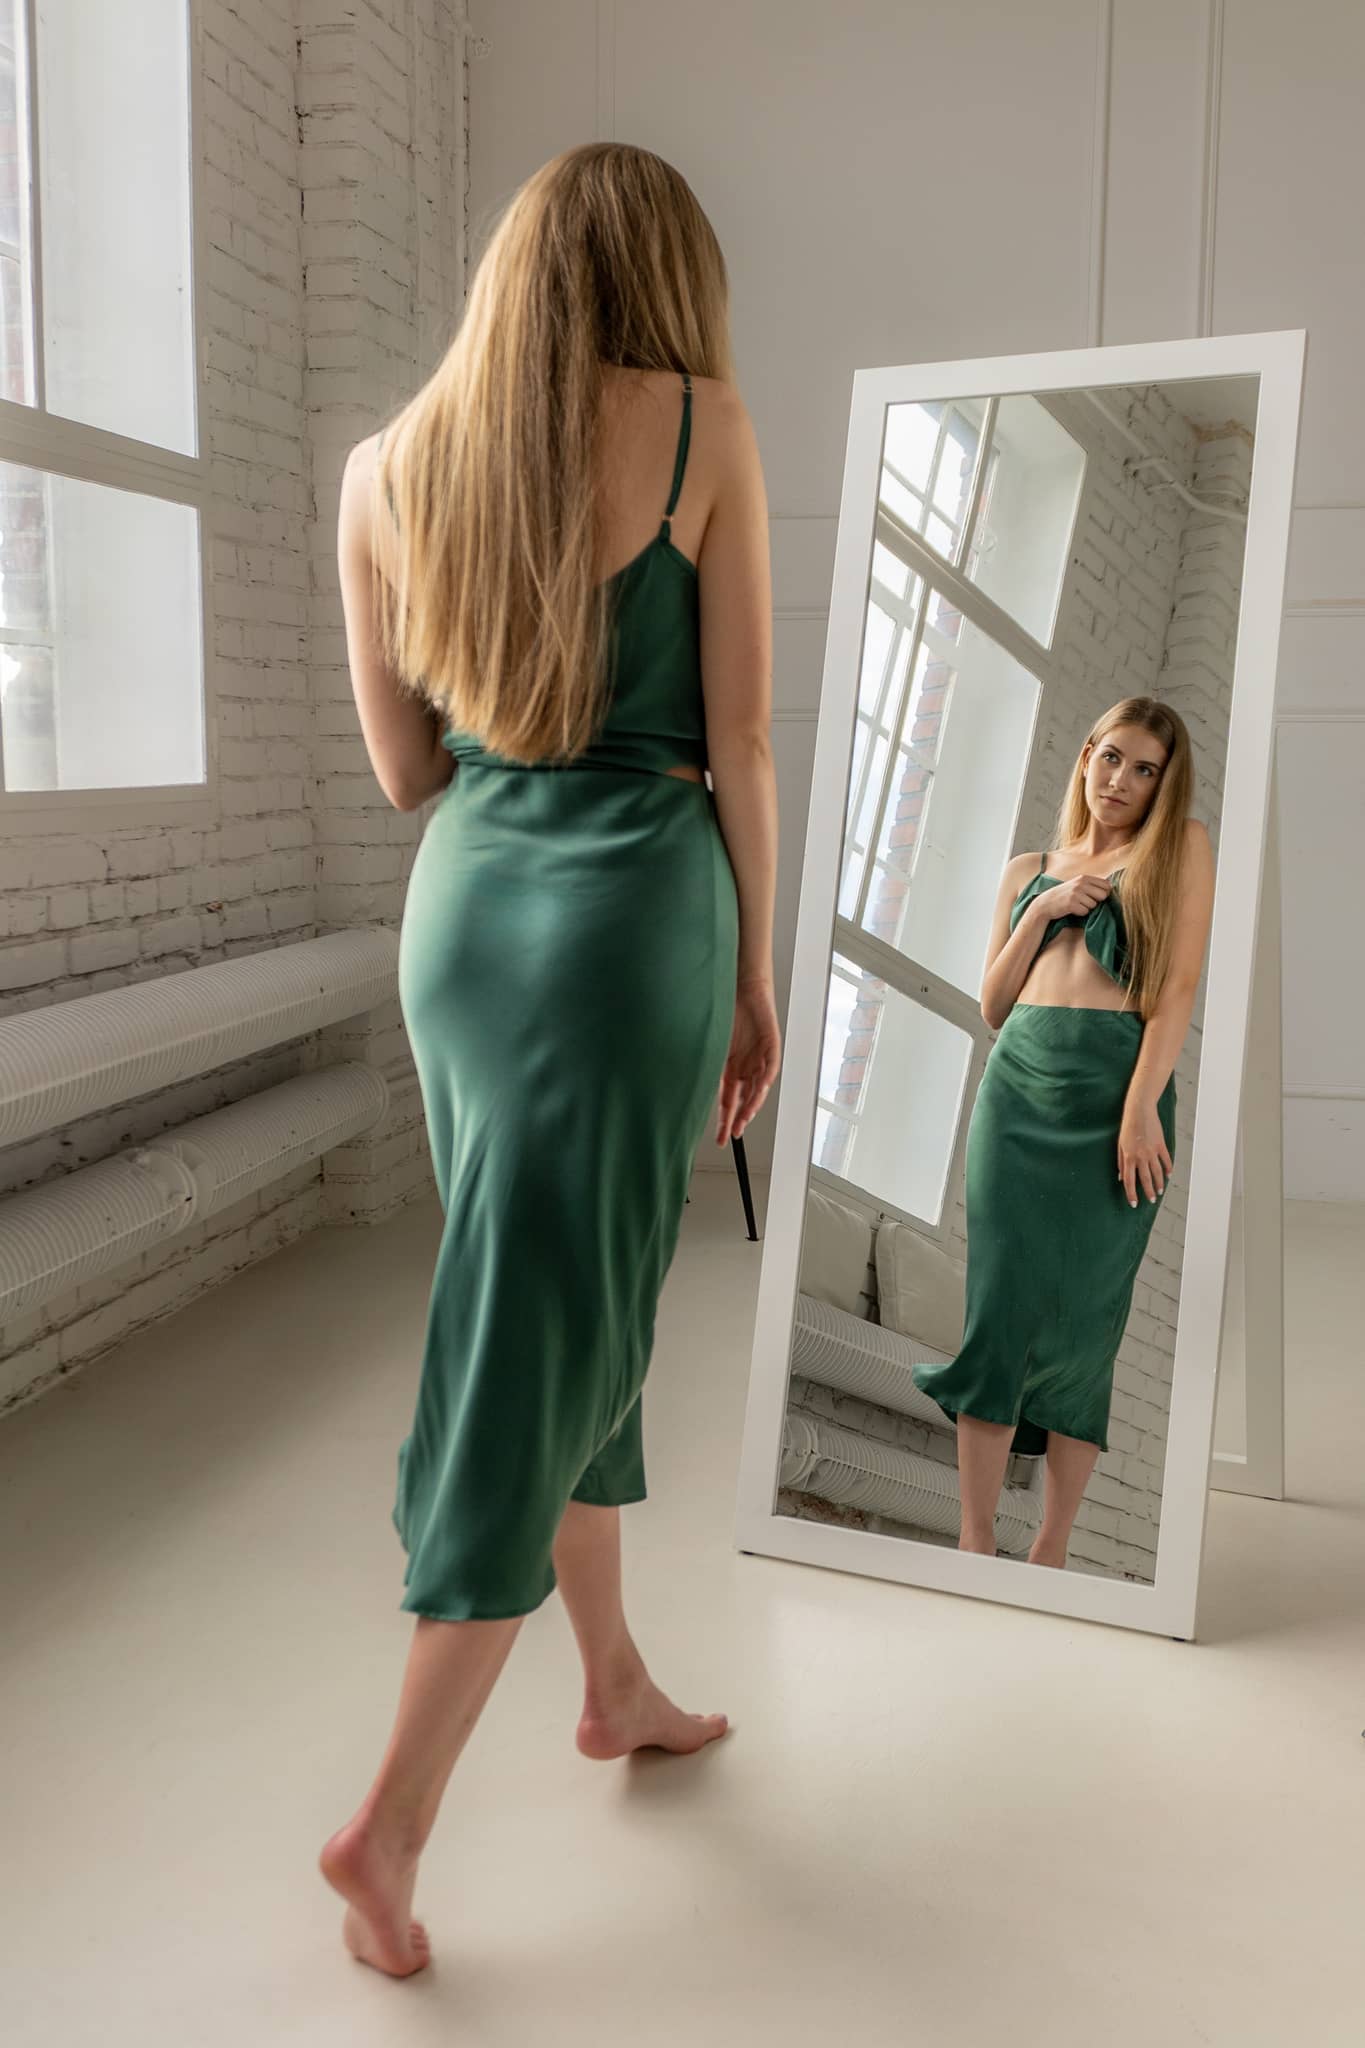 Woman wearing silk closet green skirt and camisole top. Luxury outfit.